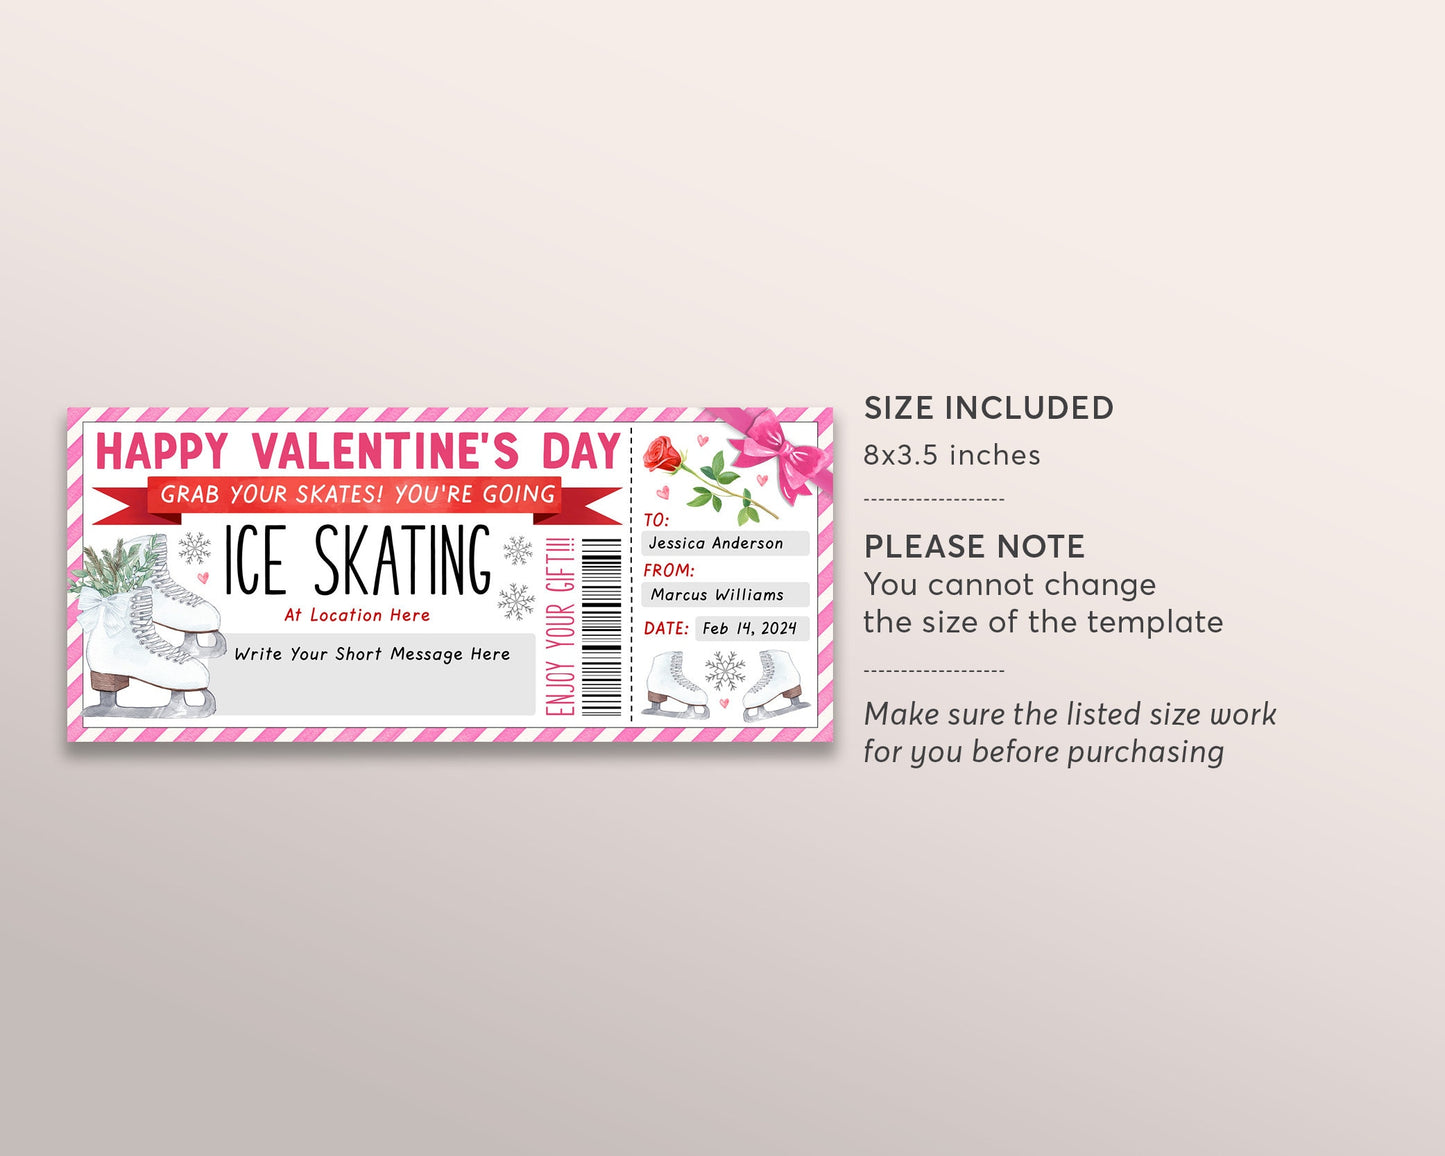 Valentines Day Ice Skating Gift Voucher Editable Template, Anniversary Skating Lessons Gift Certificate For Her, Skating Membership Coupon